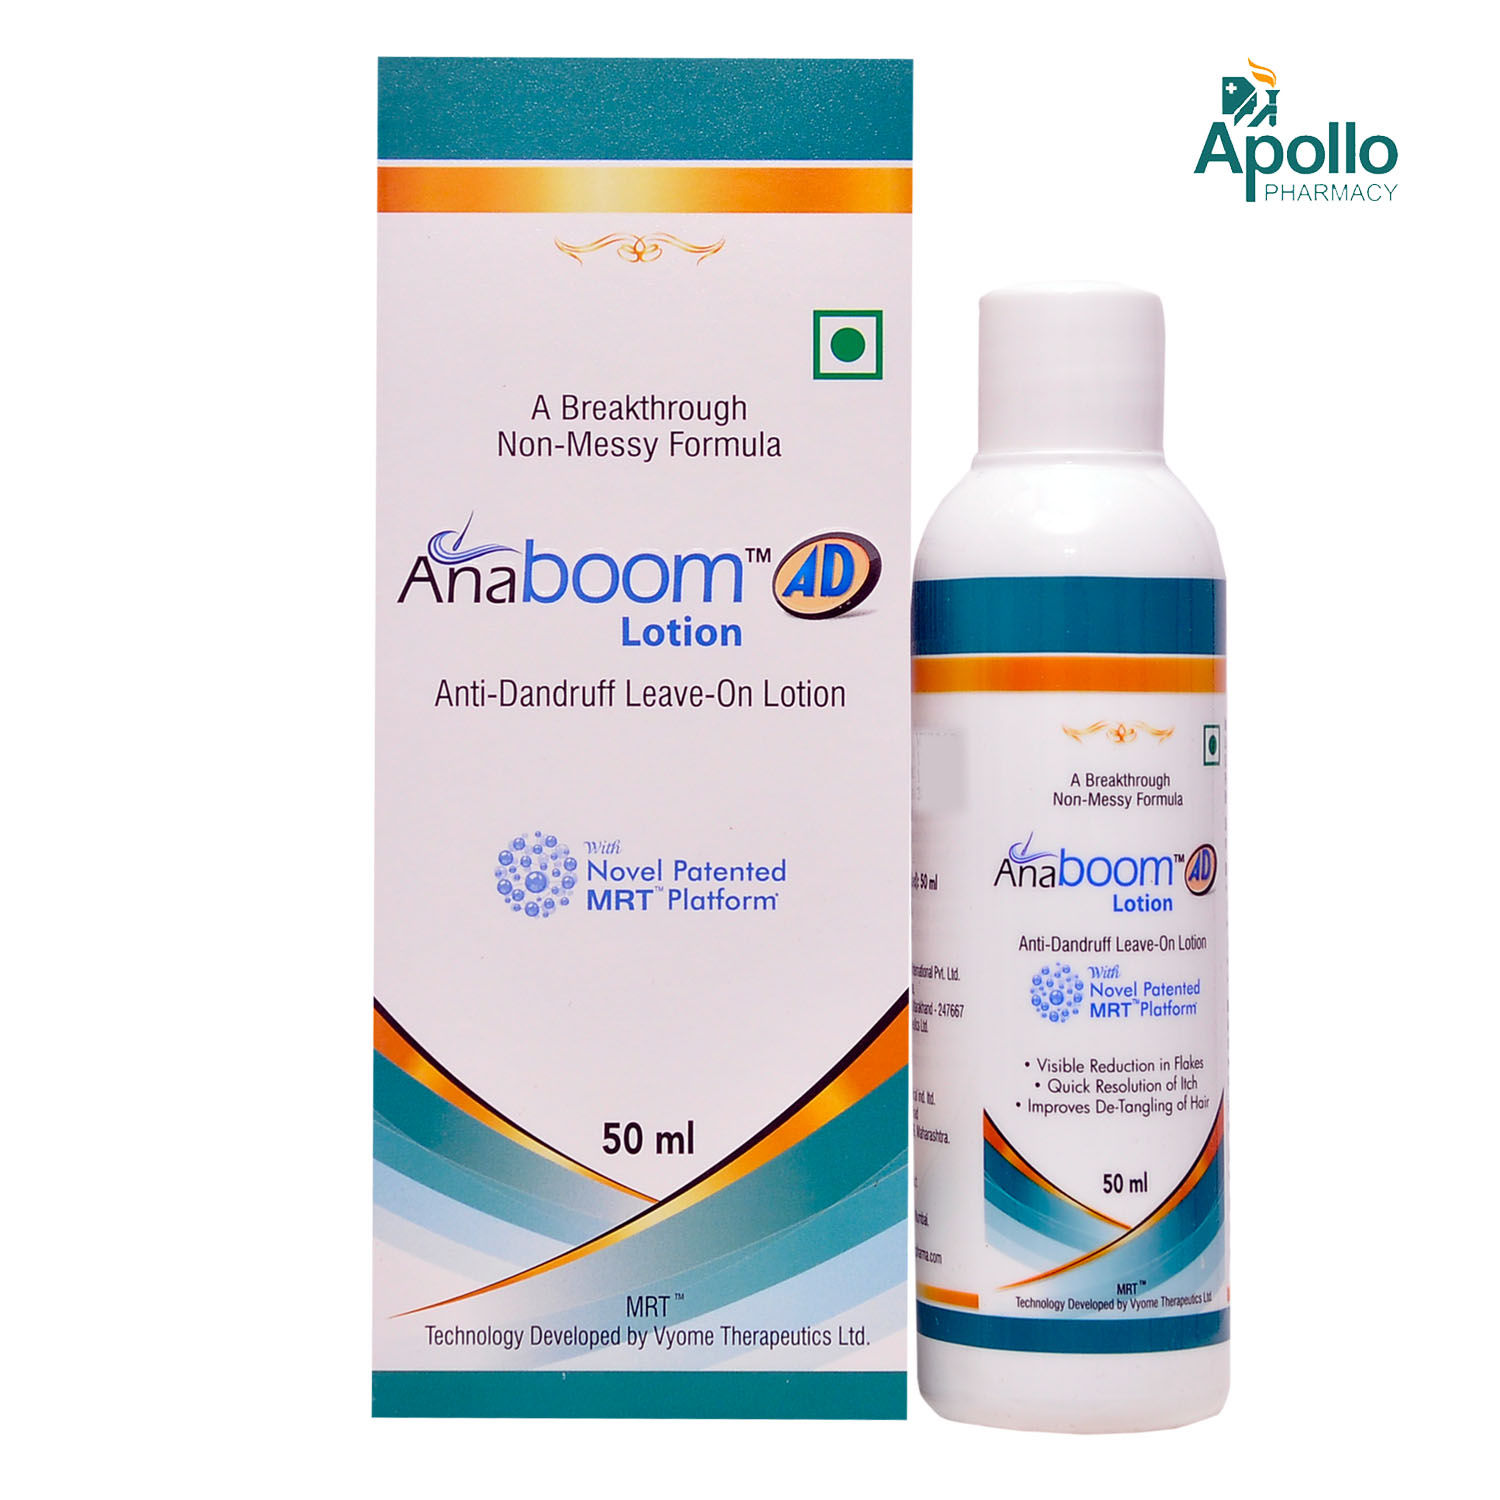 Anaboom AD Lotion, 50 ml Price, Uses, Side Effects, Composition - Apollo  Pharmacy